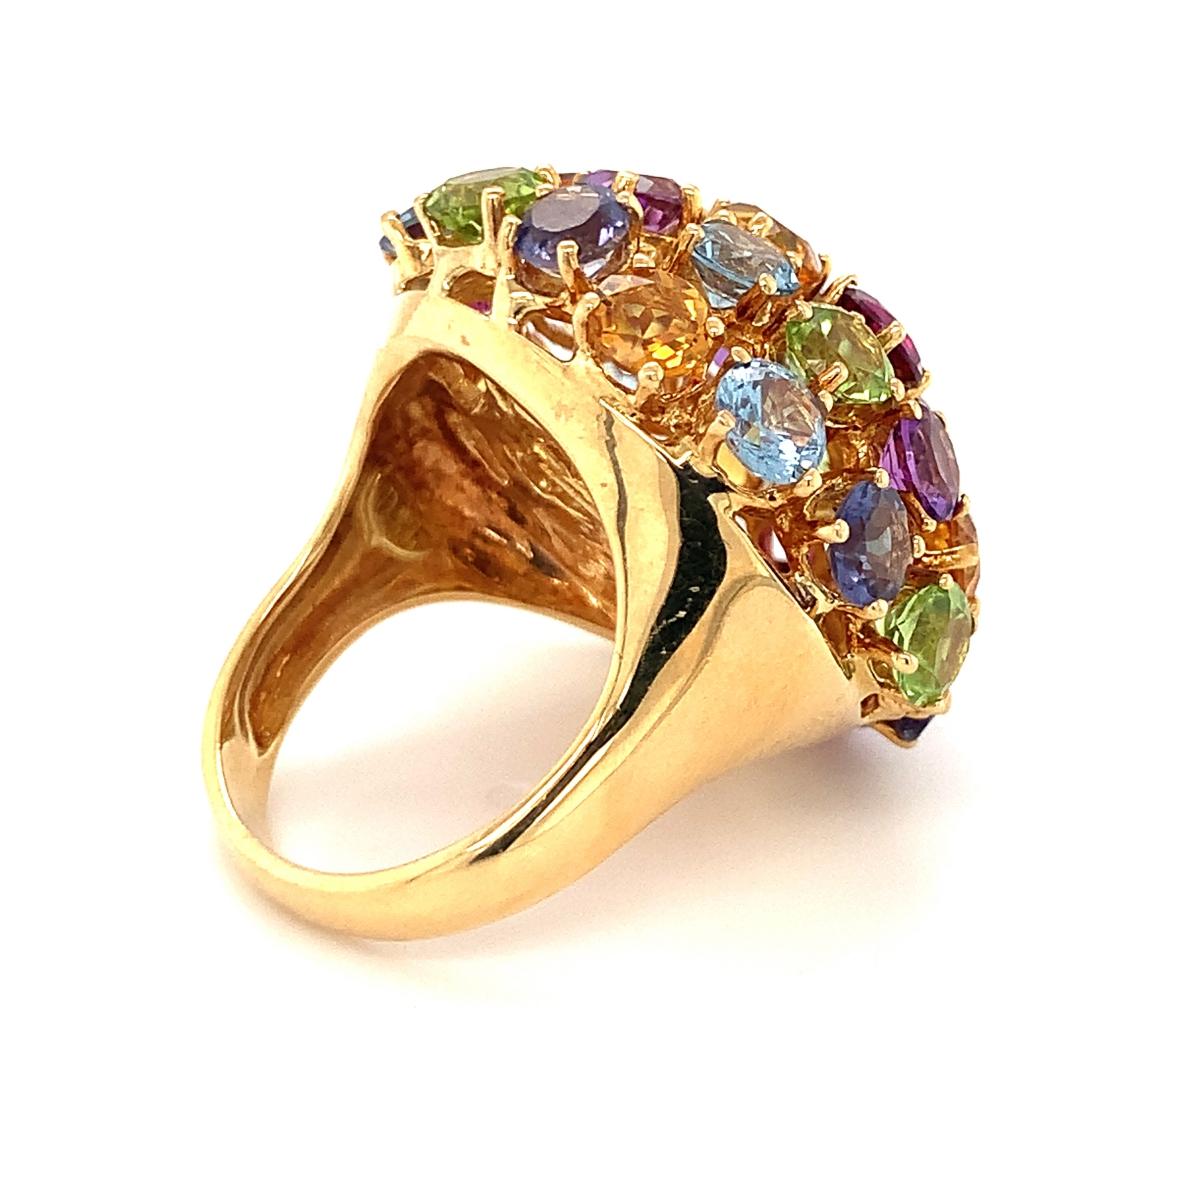 Multi-Gem Bombe Ring in 18K Yellow Gold, circa 1960s For Sale 1